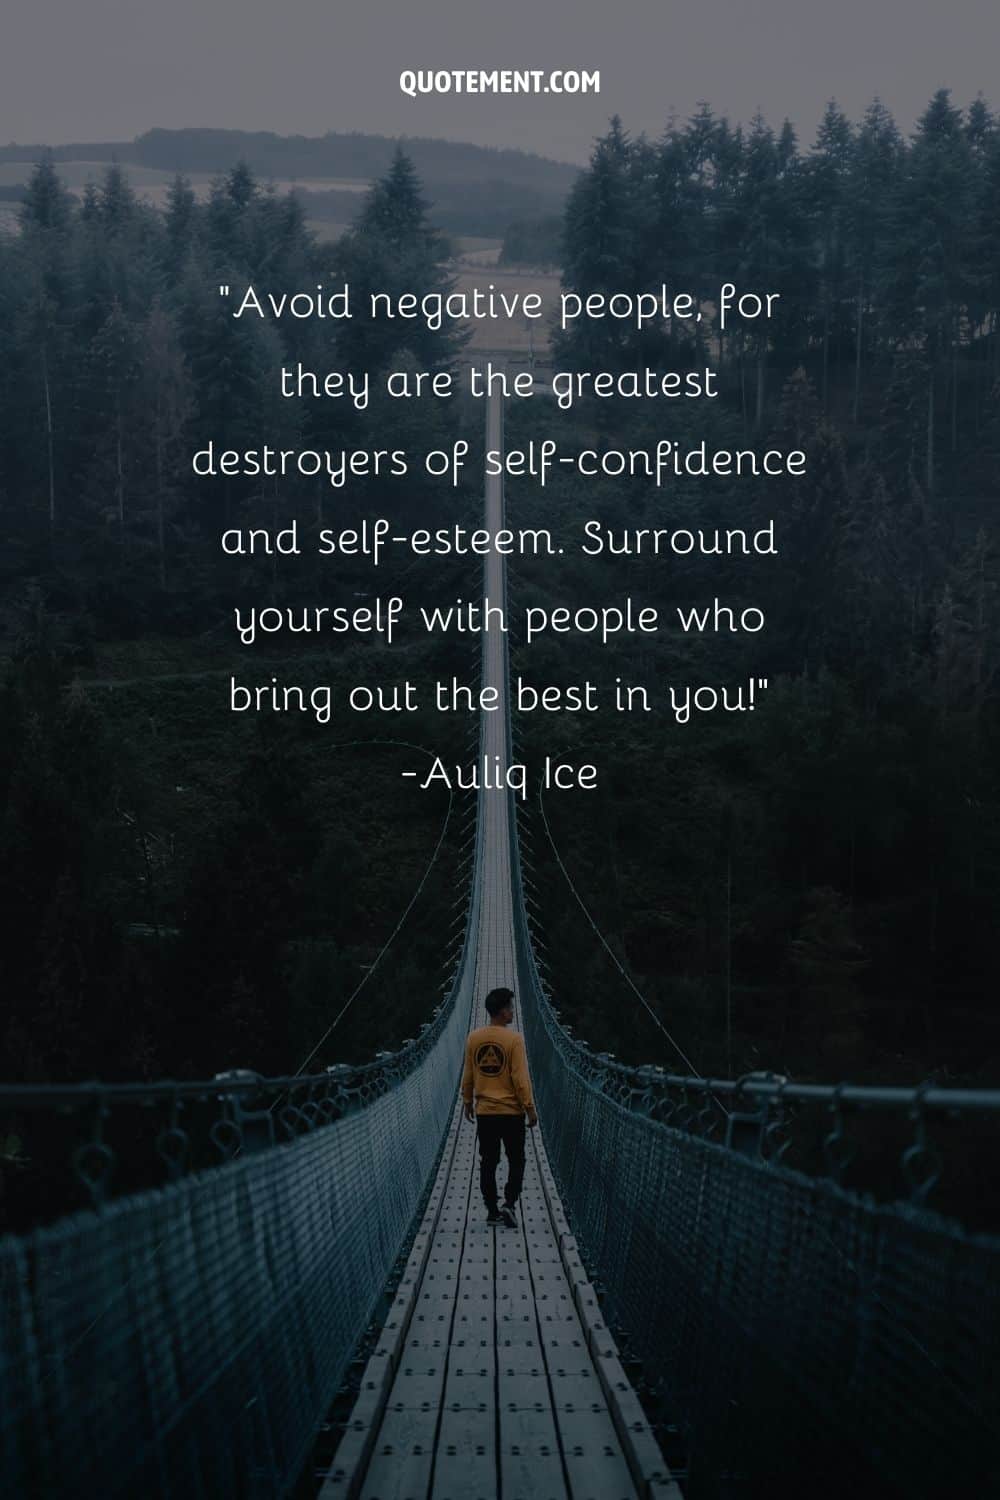 Avoid negative people, for they are the greatest destroyers of self-confidence and self-esteem